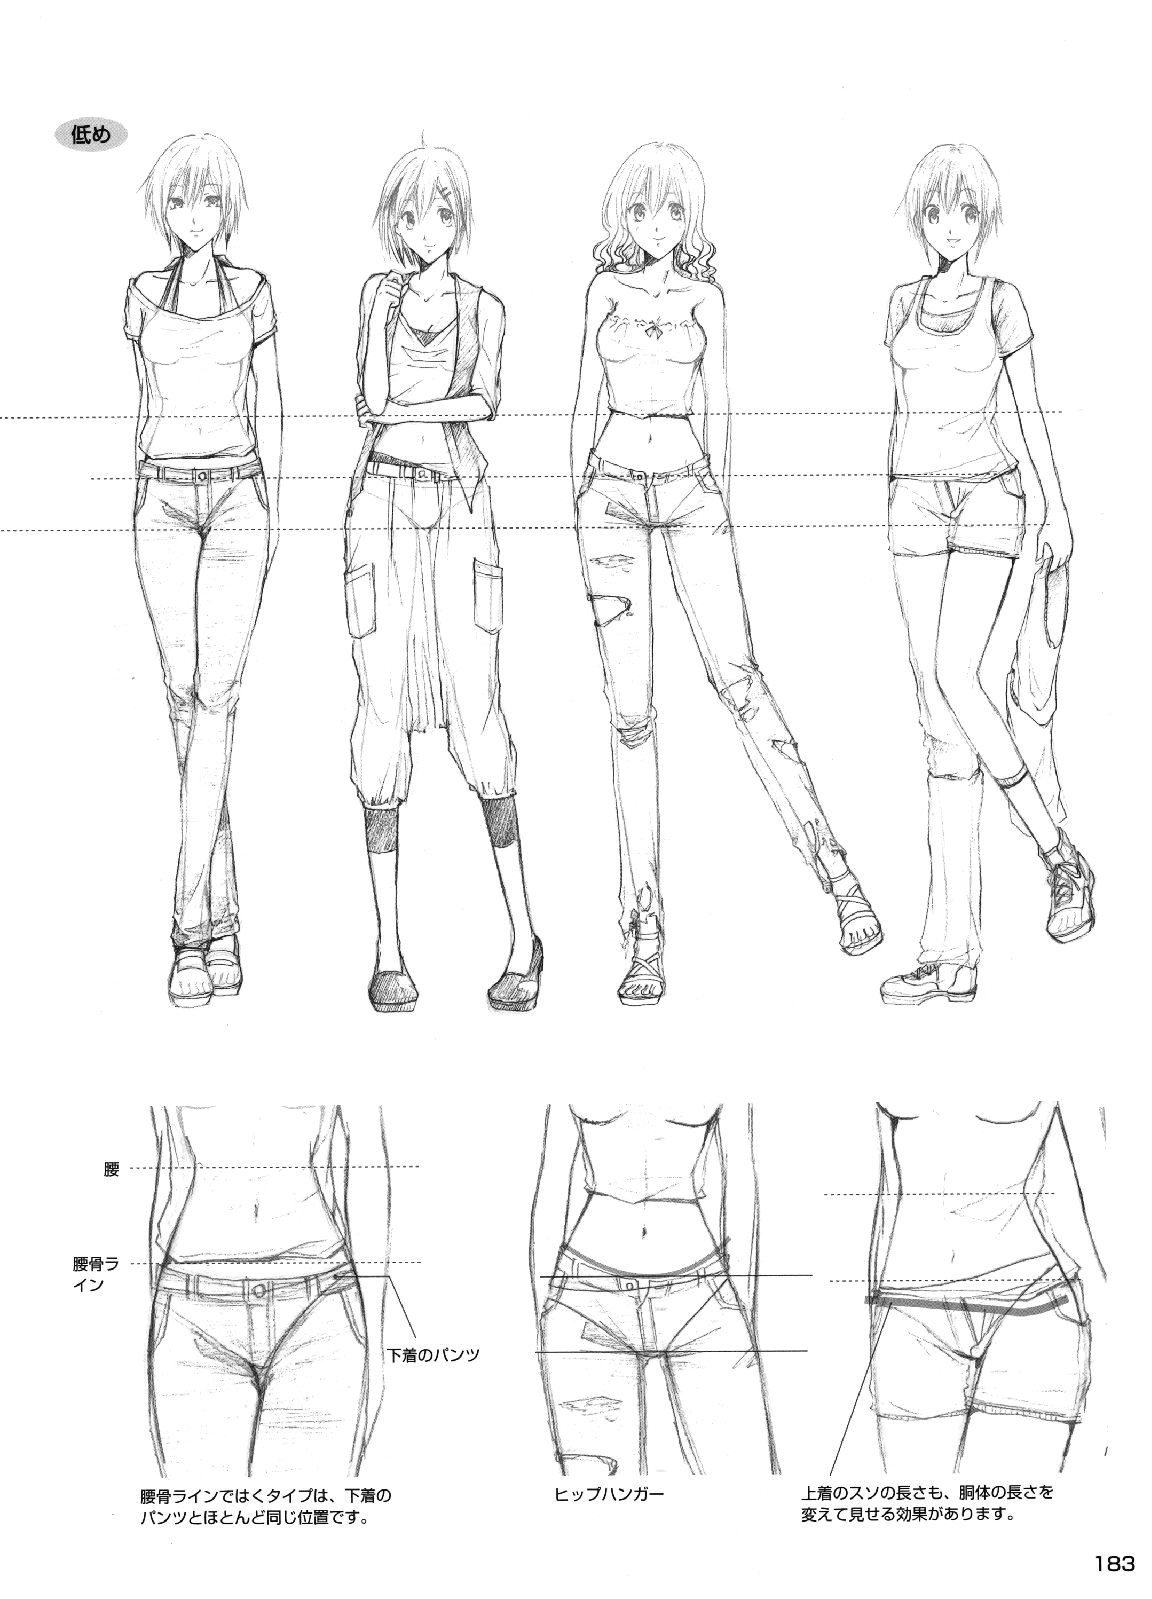 How to Draw Anime Girl Clothes Help for Clothing Sketching Manga Tutorial Zeichnungen